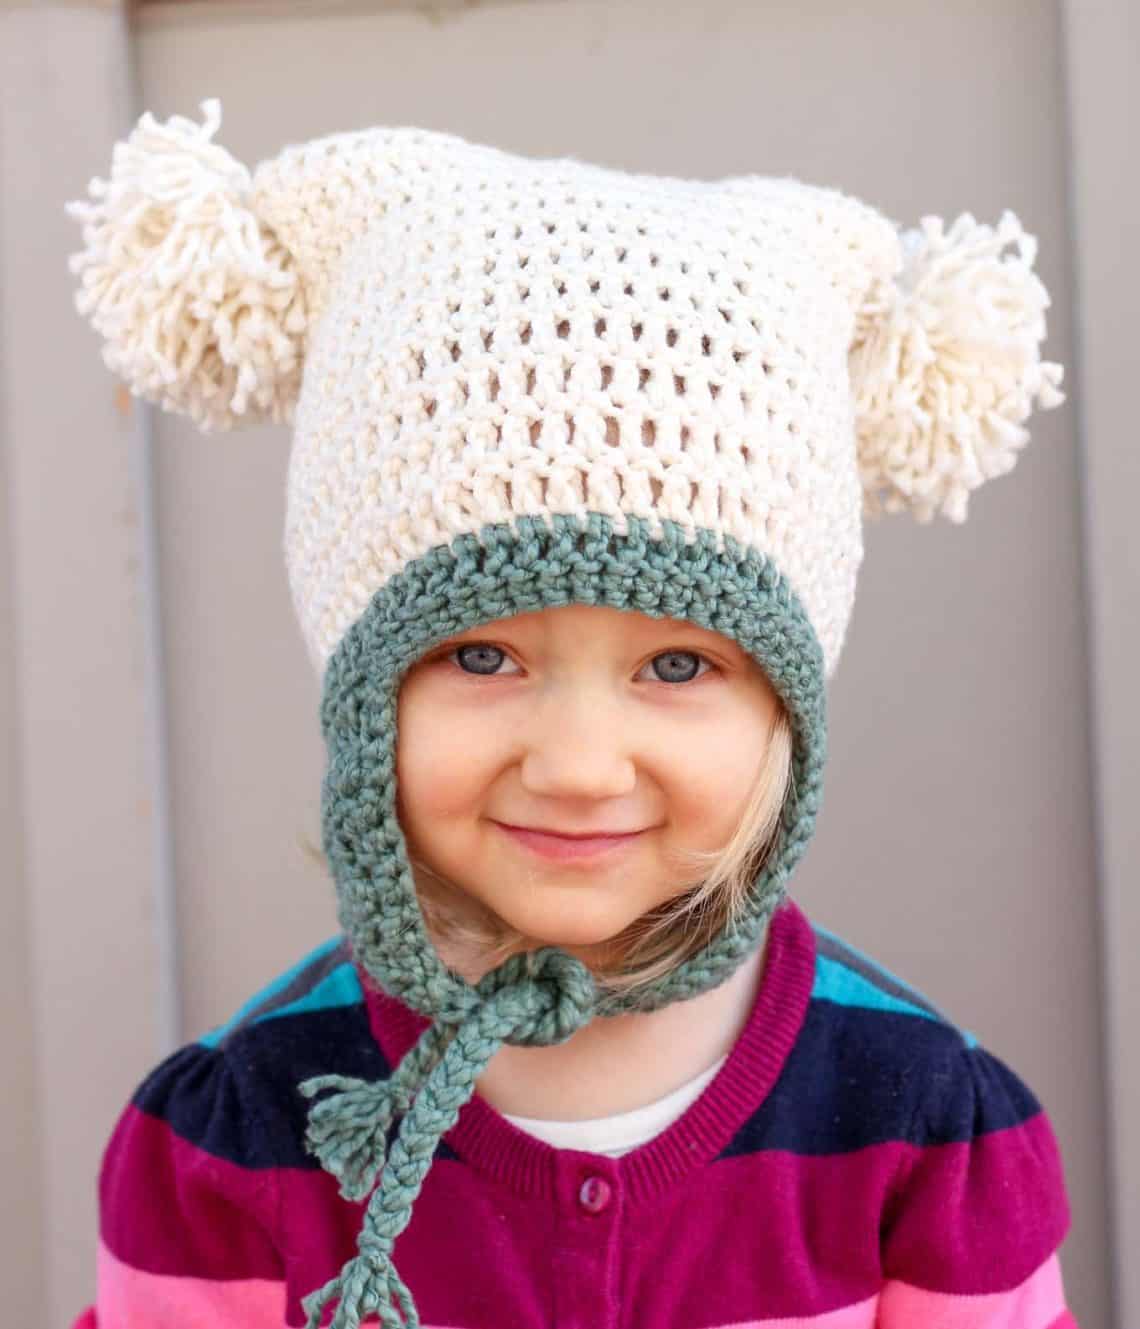 Handmade Crochet Beanie Hat for Winter Child Beanie Slouchy Toque for Child Twisted Canyon Beanie Beanie With Fur Pom Pom Crochet Hat